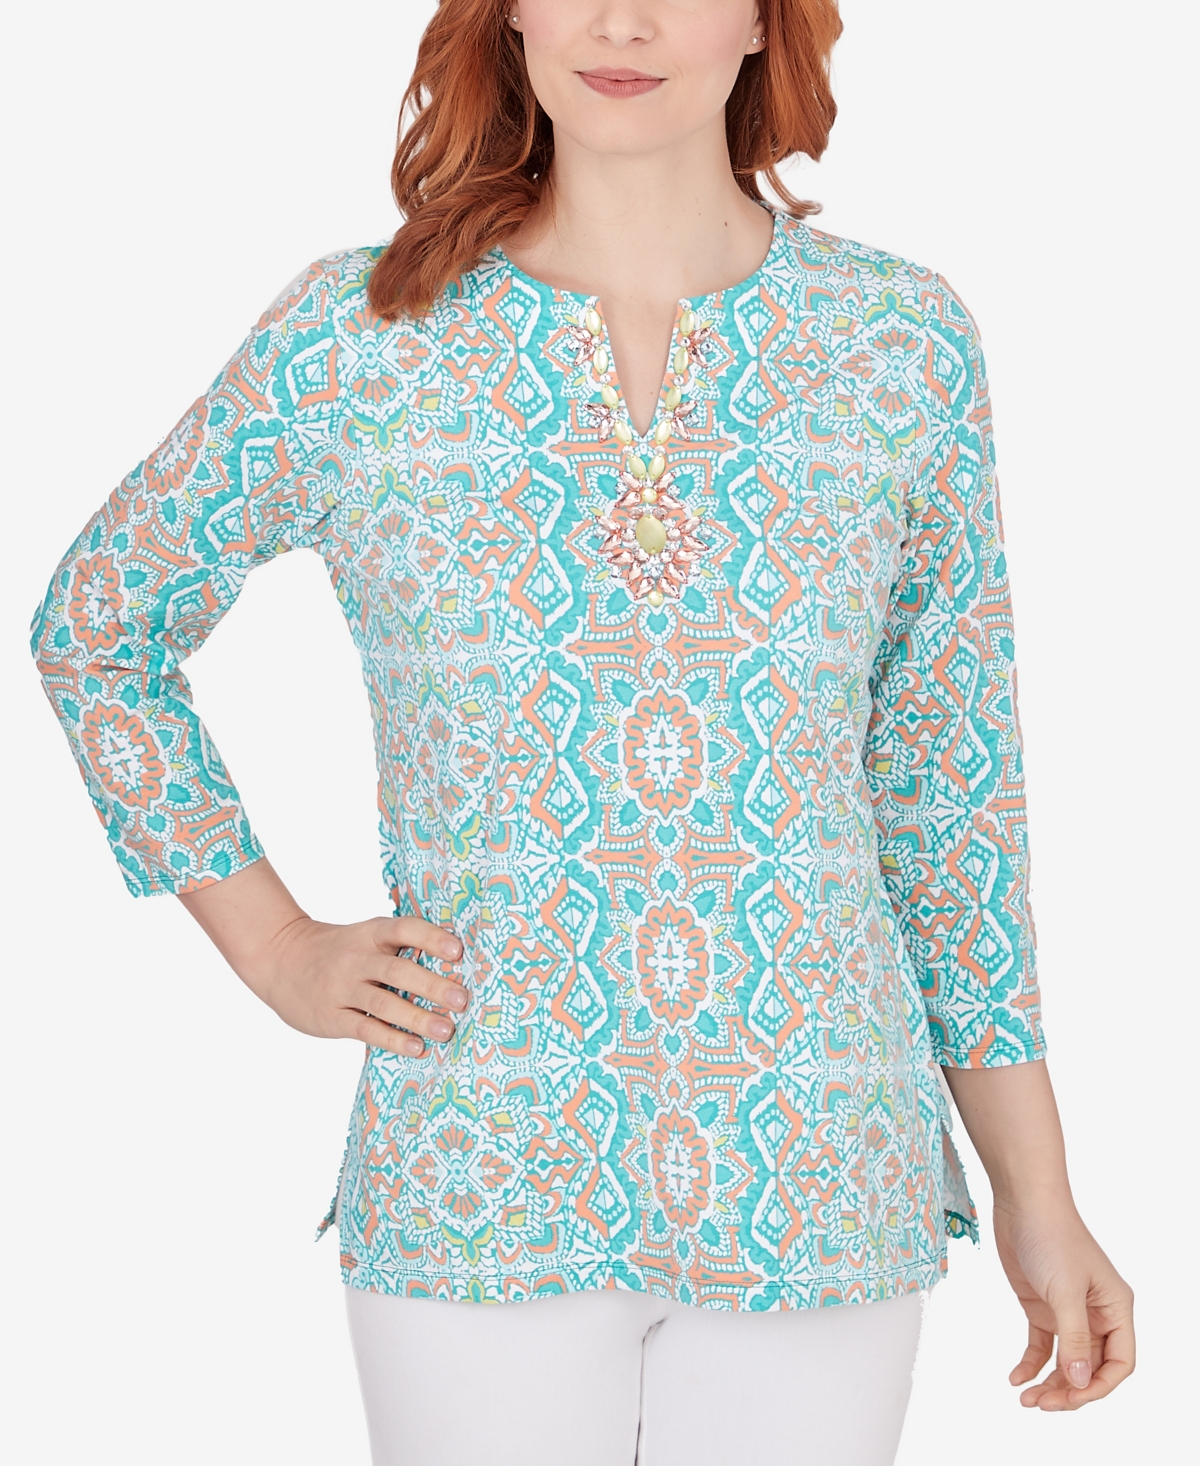 Ruby Rd. Petite Medallion Stretch Knit Top In Clear Blue Multi